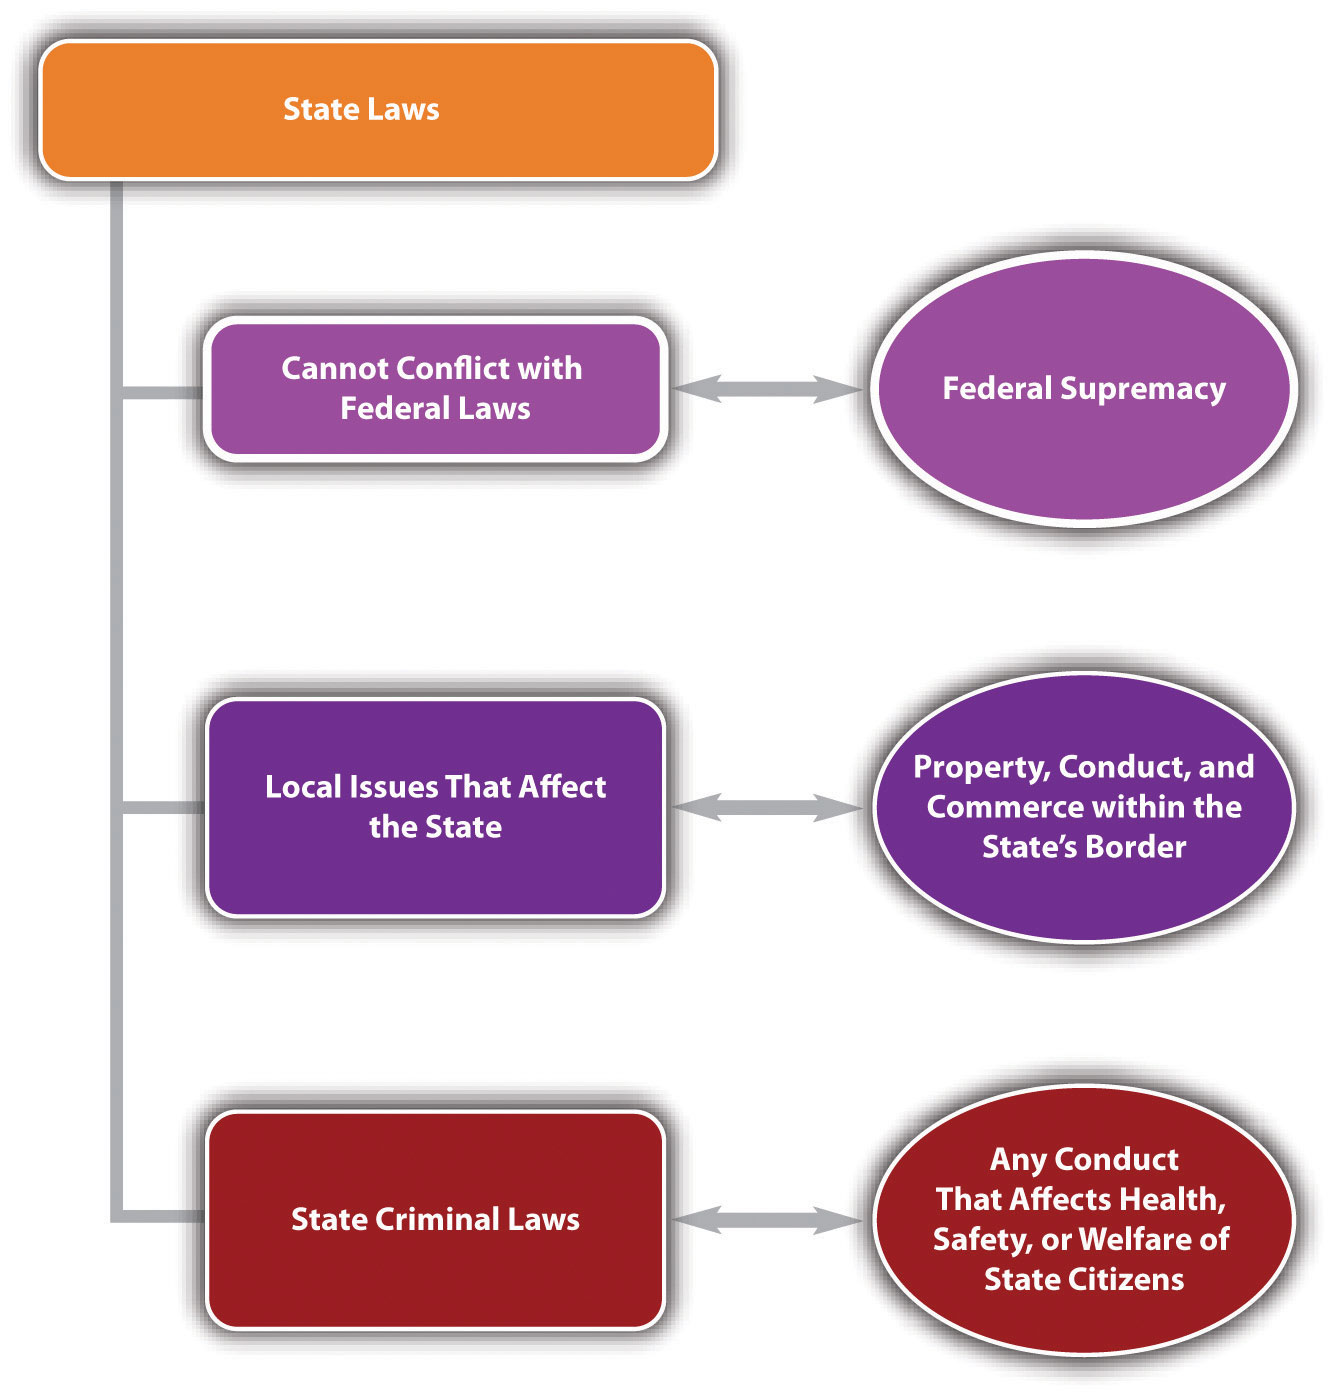 Diagram of State Laws